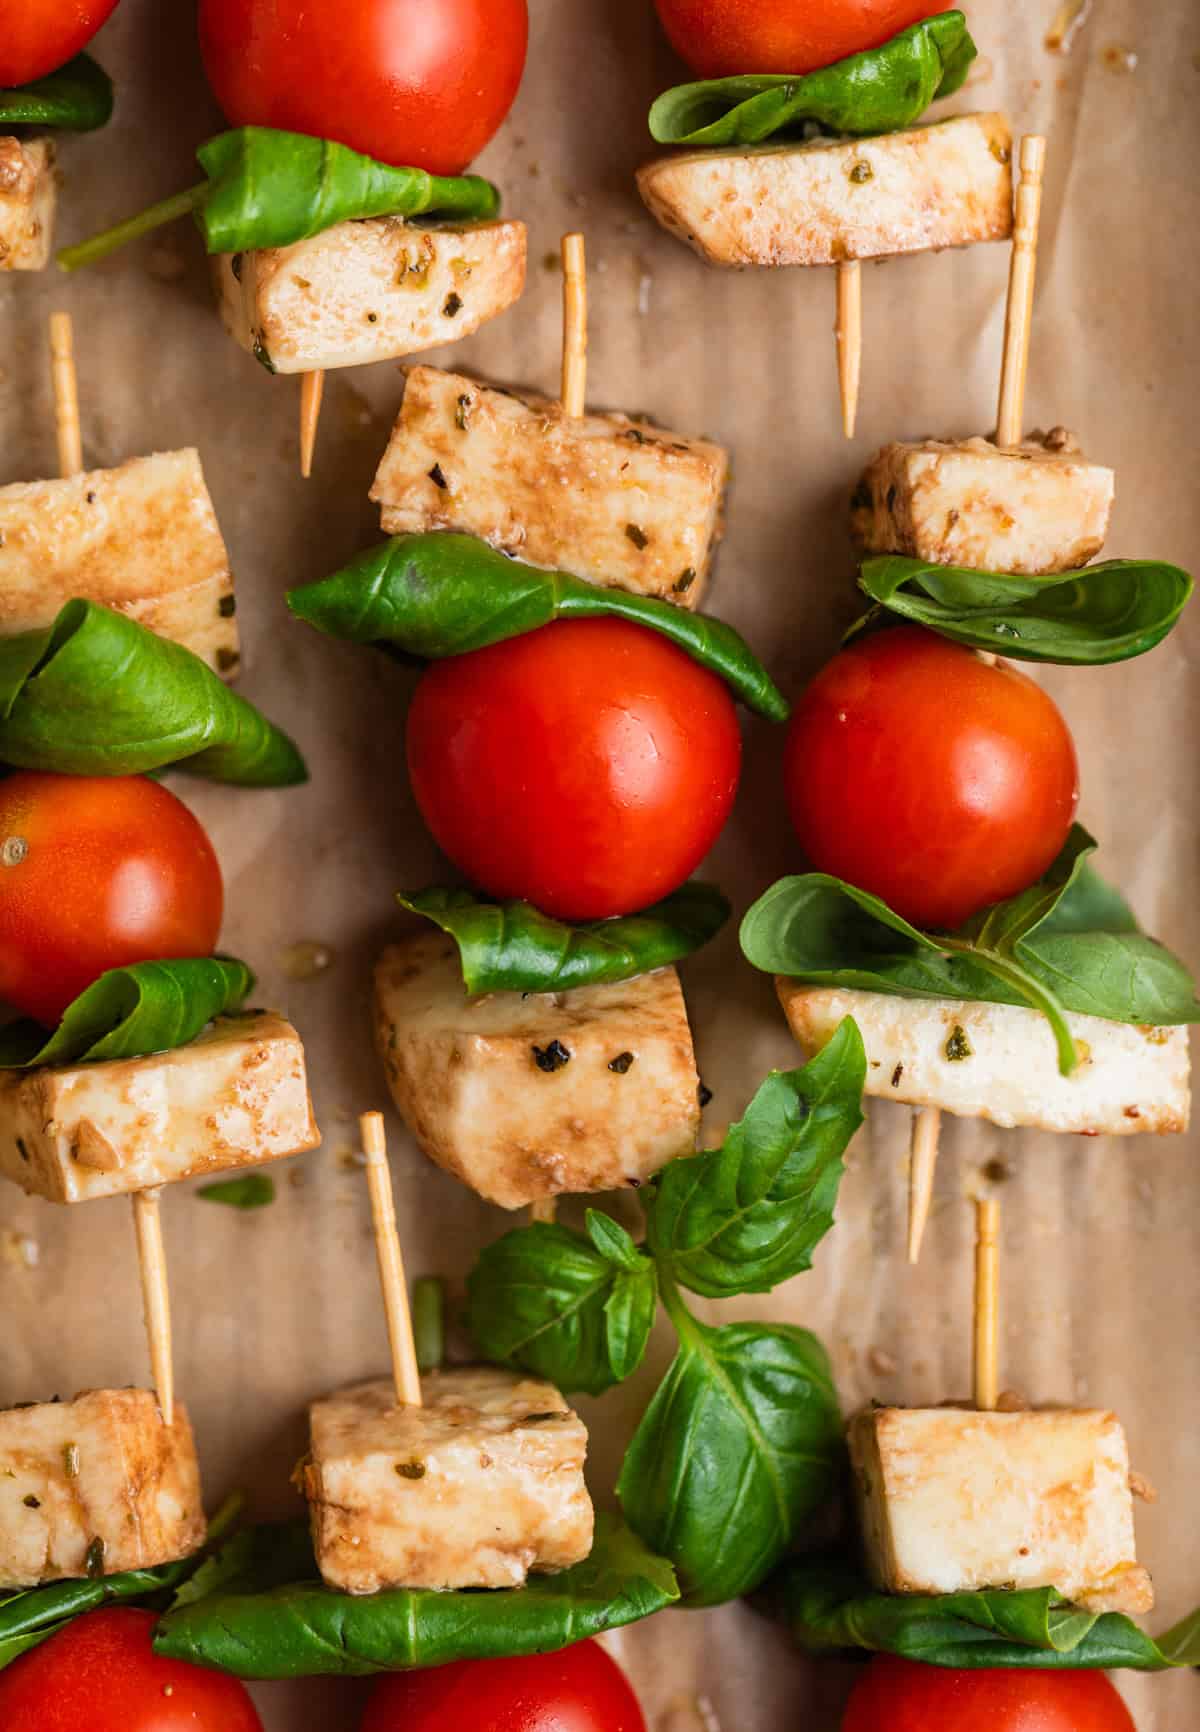 Caprese salad skewers lined on parchment.